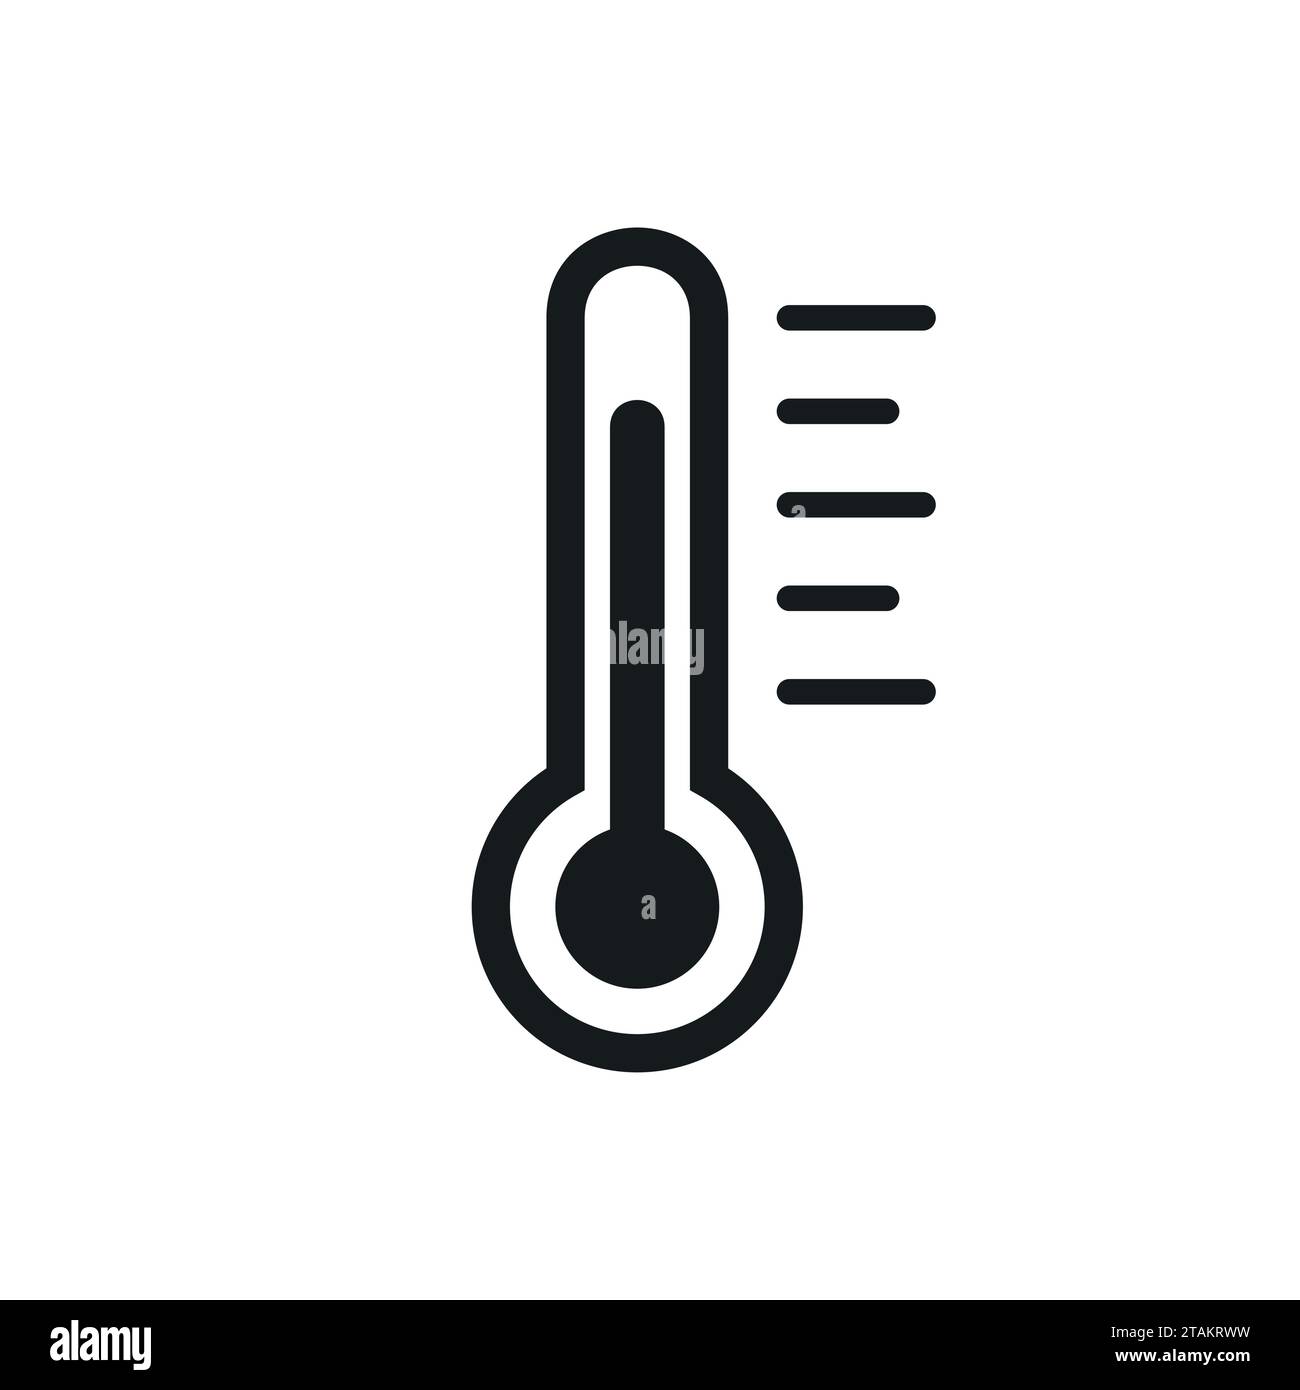 Outdoor thermometer isolated on white Black and White Stock Photos & Images  - Alamy